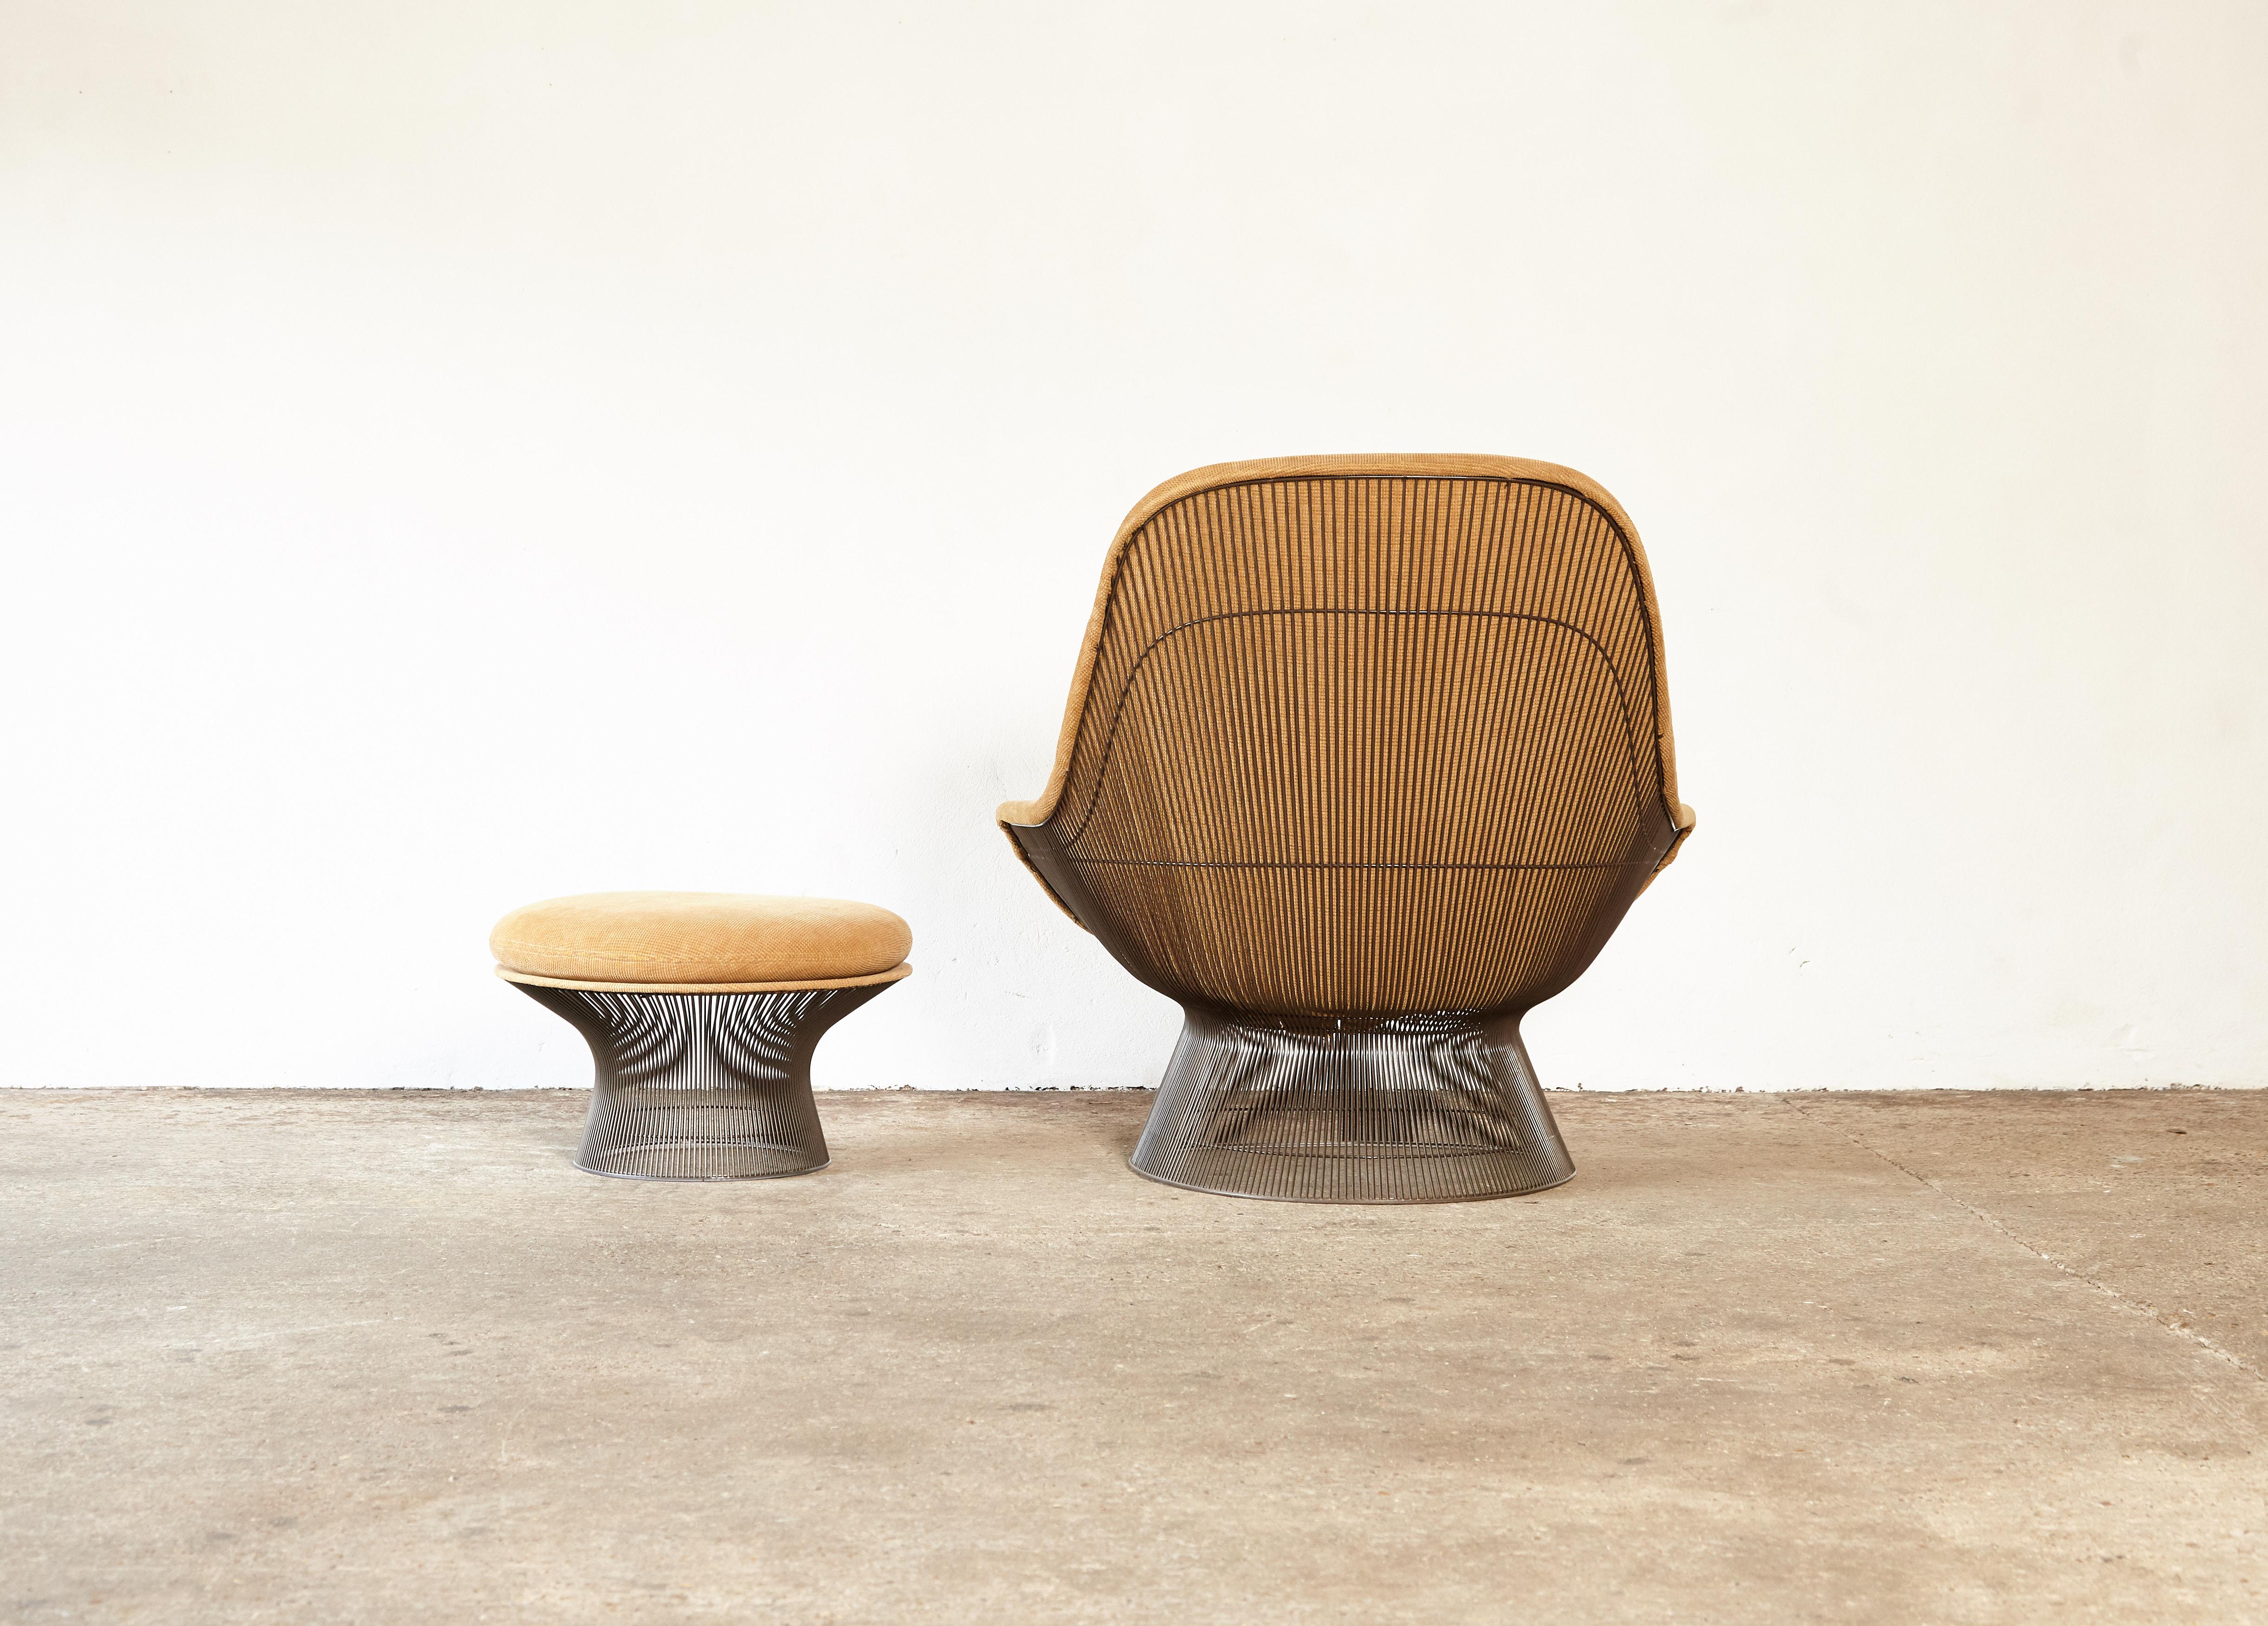 American Warren Platner for Knoll Bronze Lounge Chair and Ottoman, USA, 1960s/70s